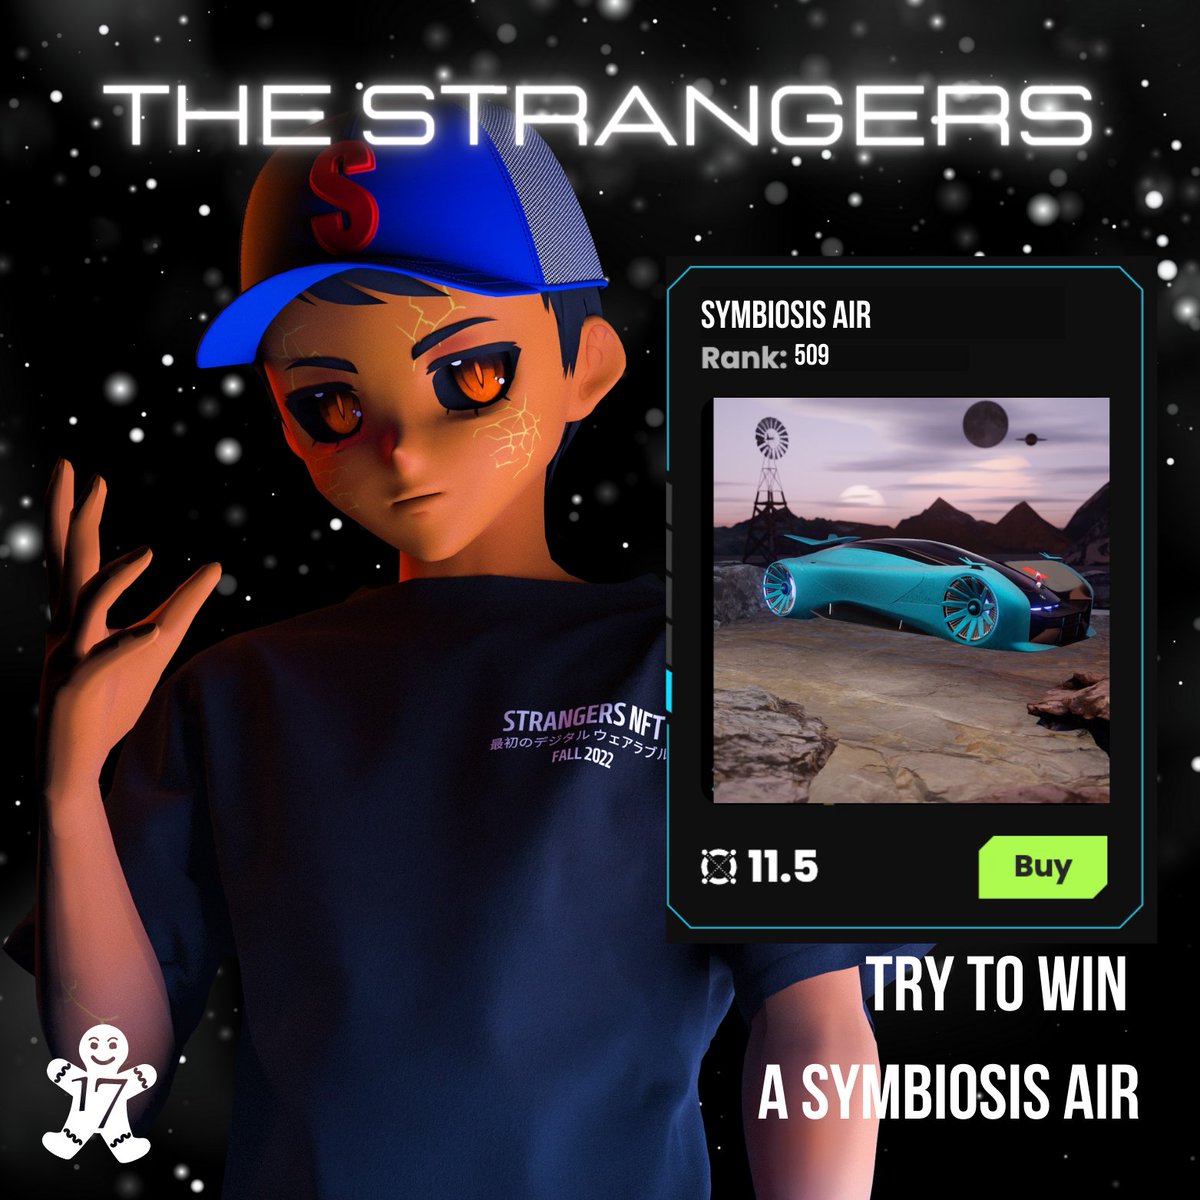 THE STRANGERS - ADVENT CALENDAR 🎄 17th day of our advent calendar 👀 In collaboration with @symbiosis_nft 🏎️ We are offering you a chance to win a Symbiosis Air 🎁 To enter : ▪️ RT & ♥️ ▪️ Follow @StrangersNFTs & @symbiosis_nft Winner will be announce in 48 hours.